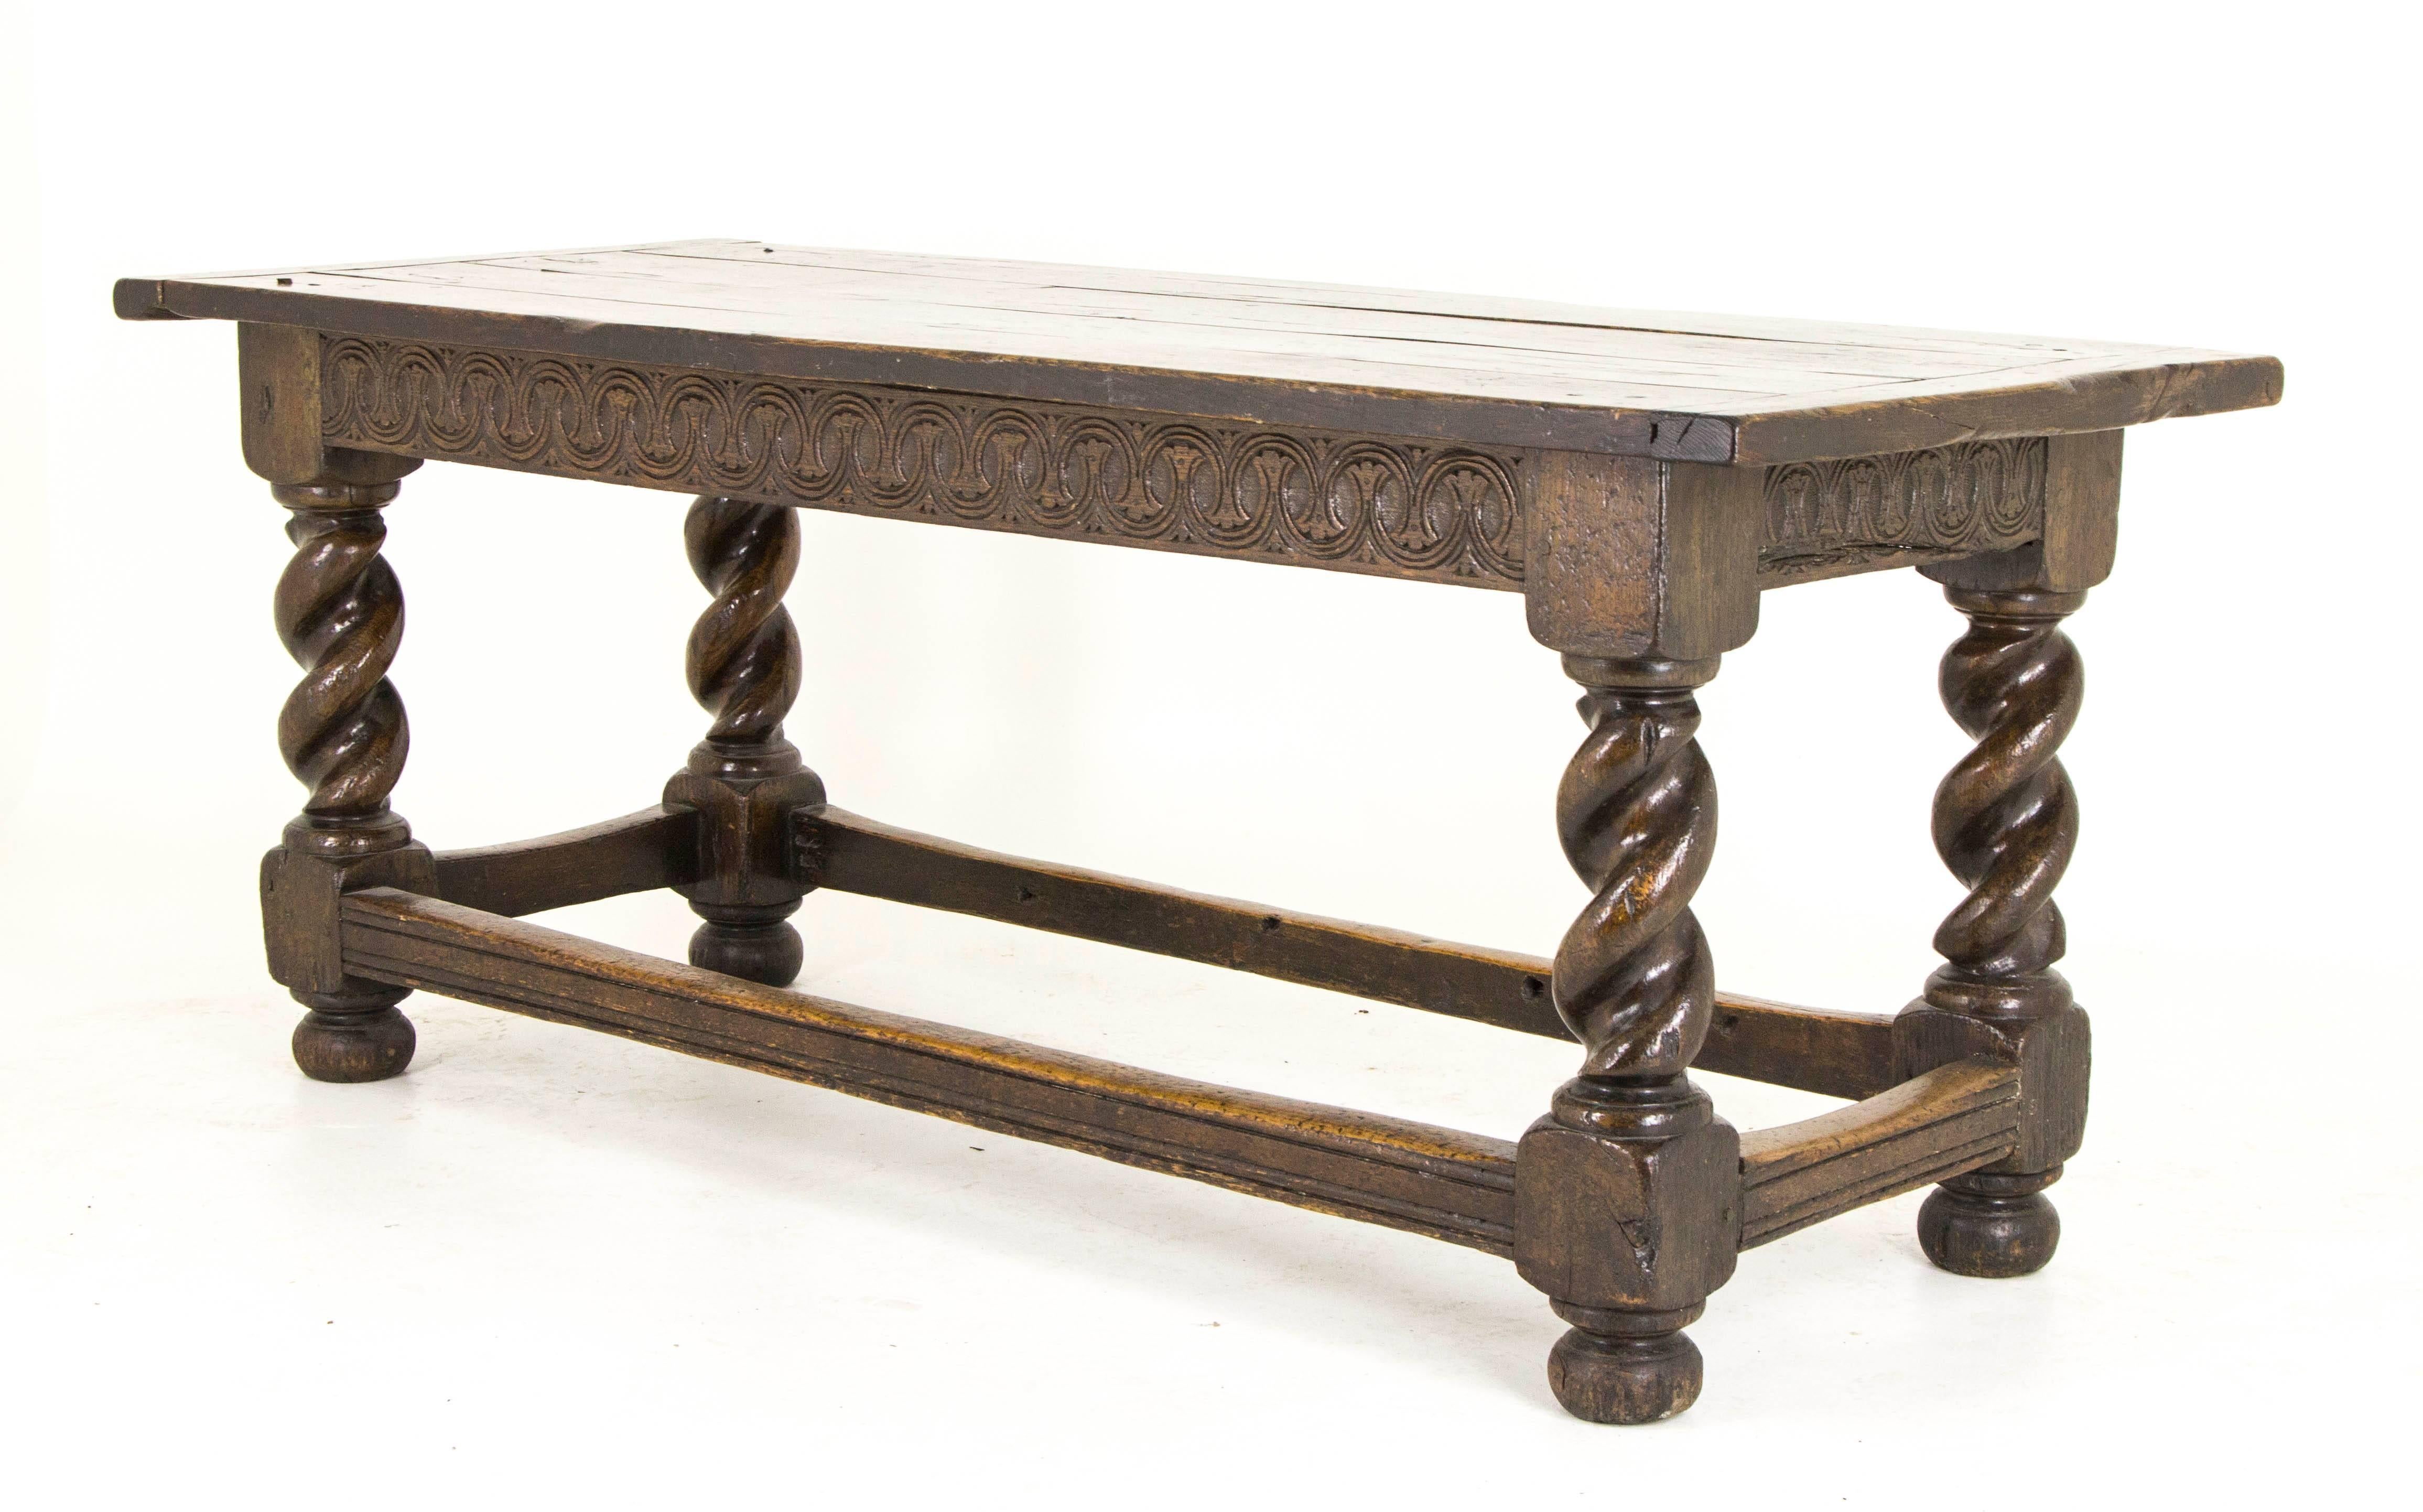 Hand-Crafted Antique Oak Table Refectory Table, England, 1700s